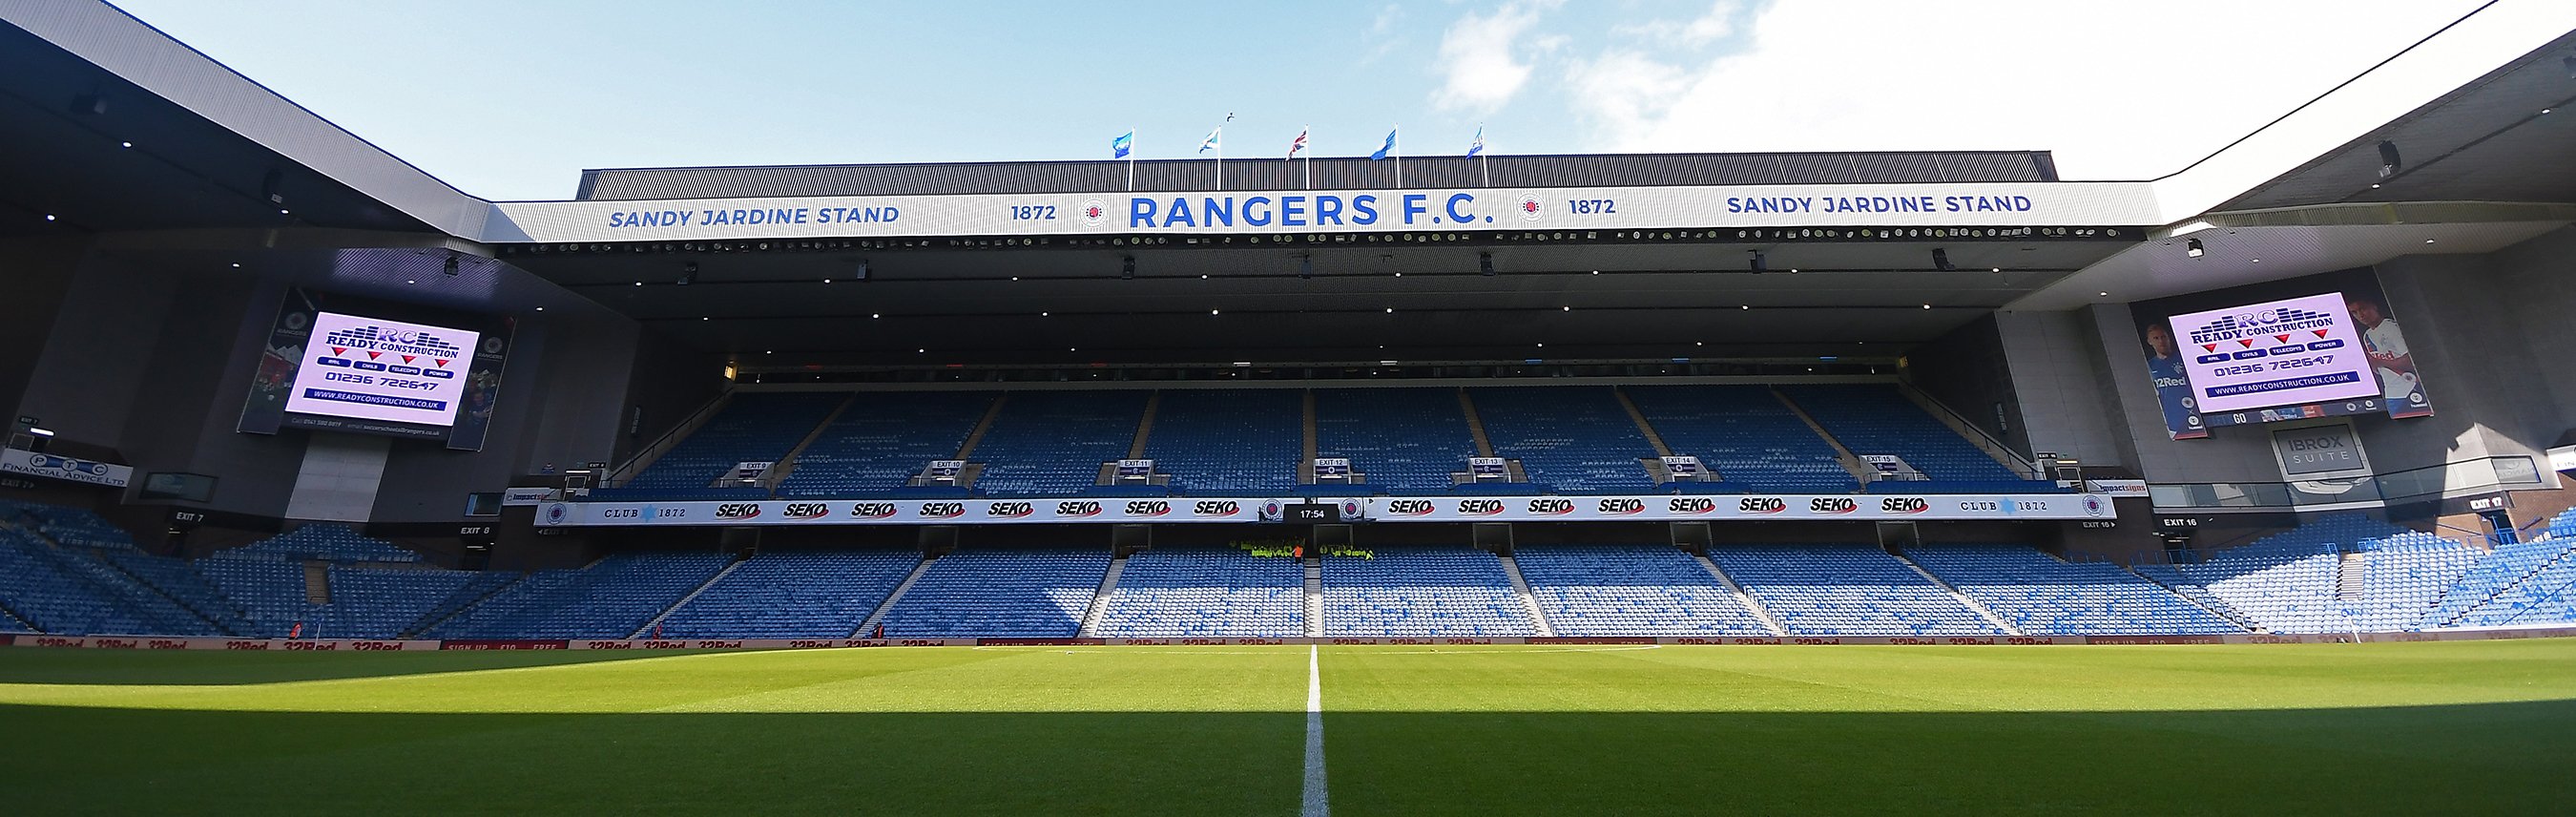 Ramsay to finally get his 'name in lights' at Ibrox - Falstaff